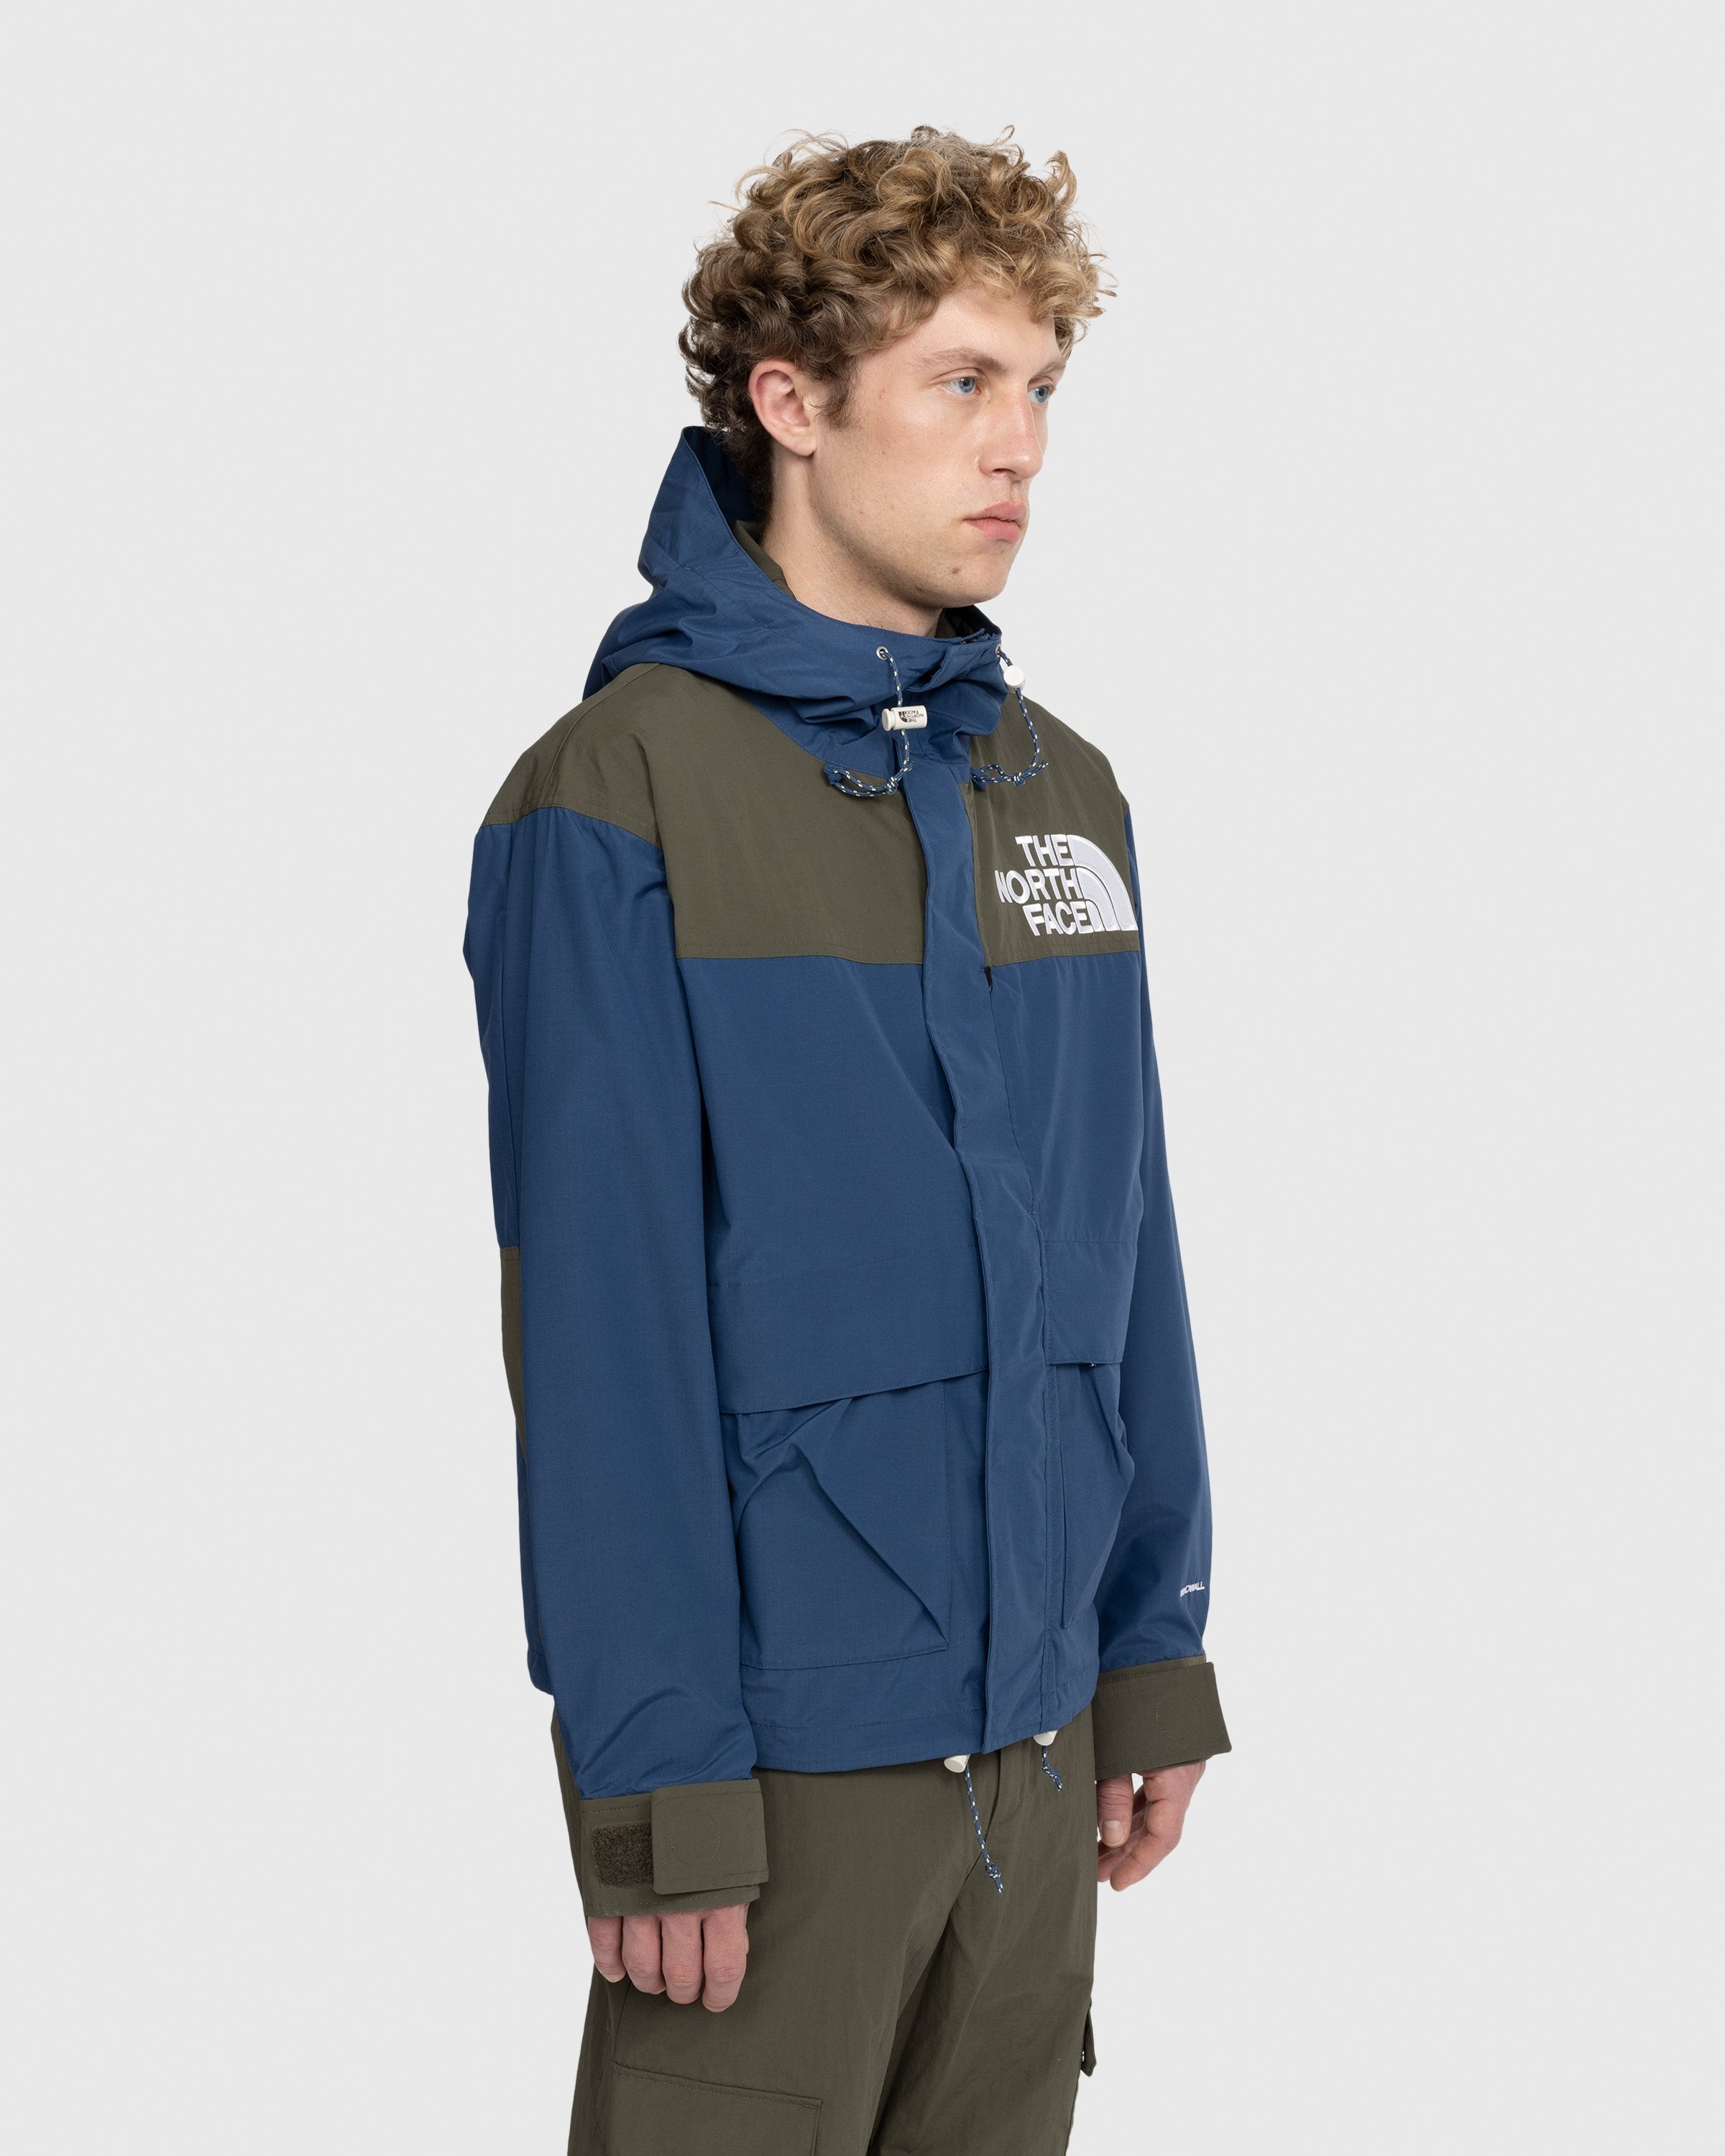 The North Face – ‘86 Low-Fi Hi-Tek Mountain Jacket Shady Blue/New Taupe Green - Windbreakers - Blue - Image 3